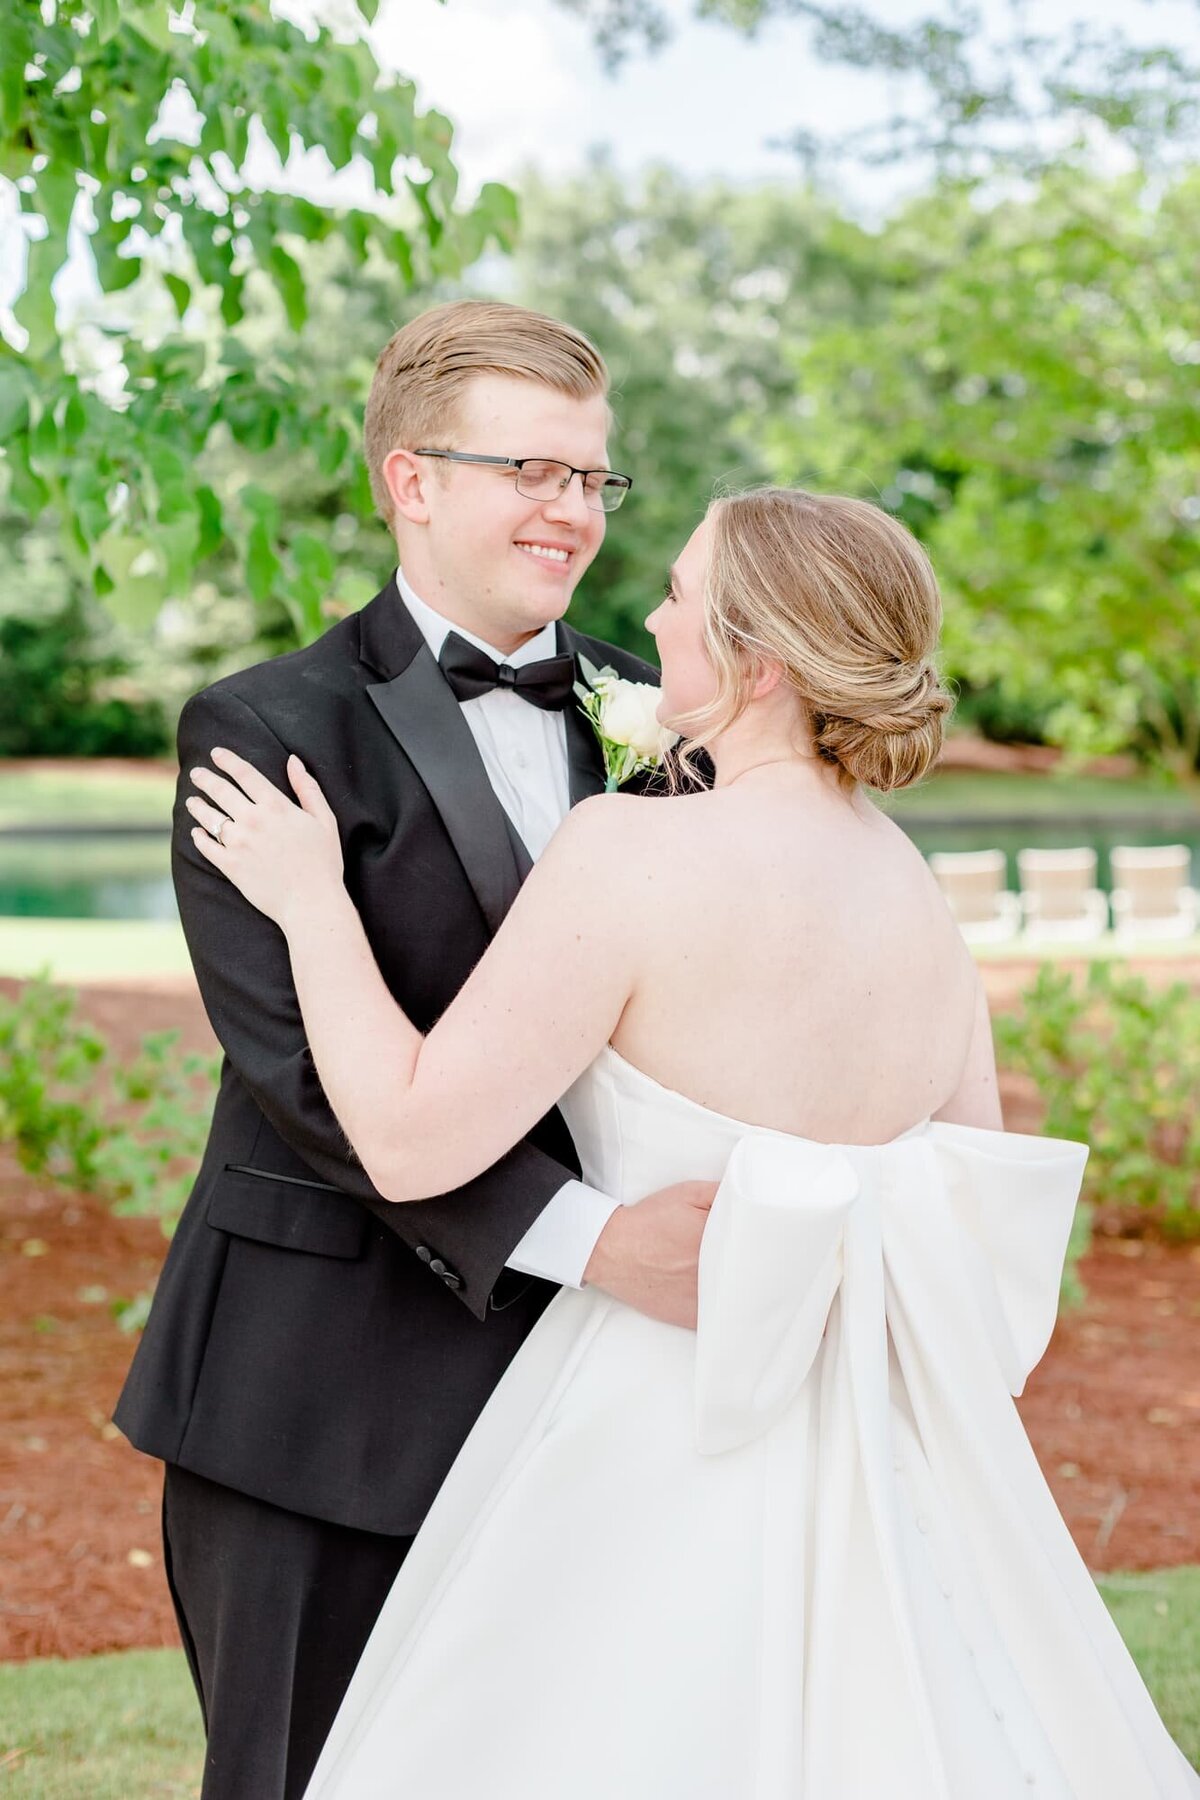 Katie and Alec Wedding Photography Wedding Videography Birmingham, Alabama Husband and Wife Team Photo Video Weddings Engagement Engagements Light Airy Focused on Marriage  Ashley + Chase's Hamilton_Kzxc